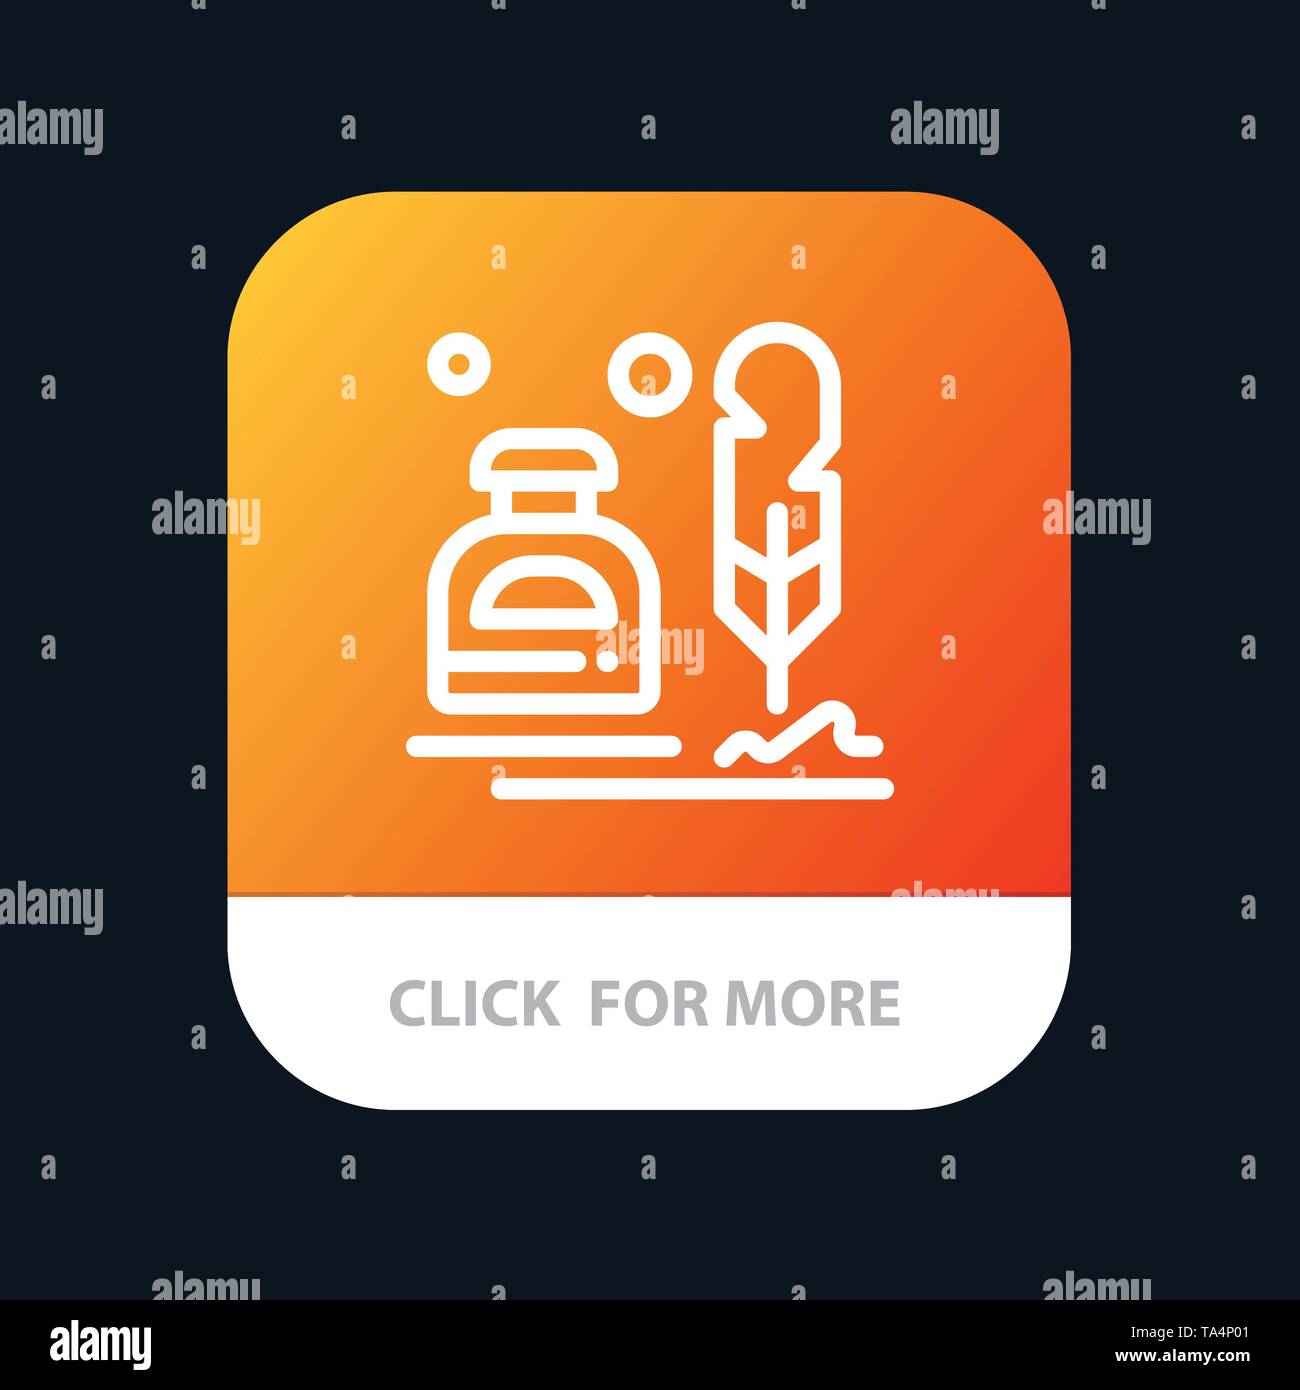 Ink, Erite, Fur, Letter, Office, Mobile App Button. Android and IOS Line Version Stock Vector